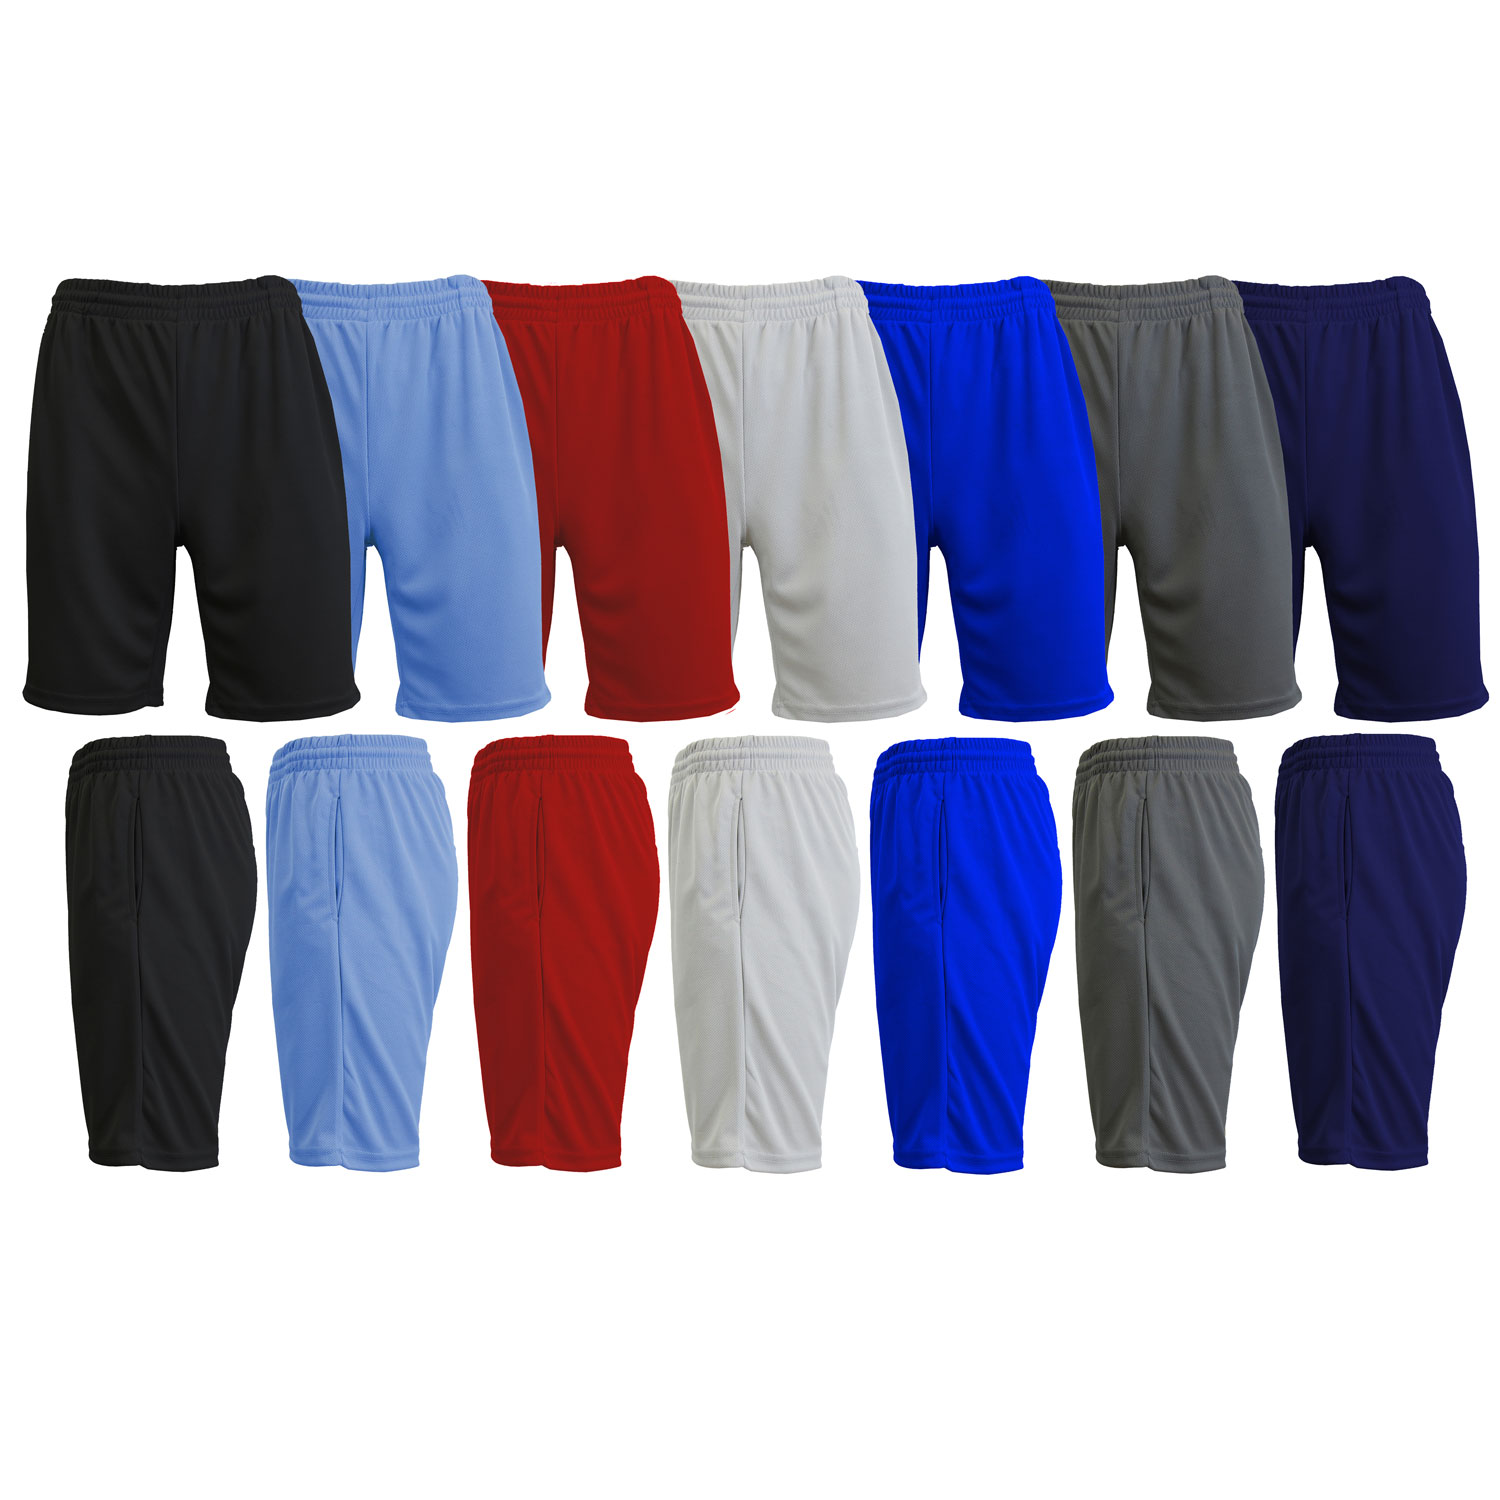 Men's Moisture Wicking Assorted Active Mesh Shorts Available In 5 Pack